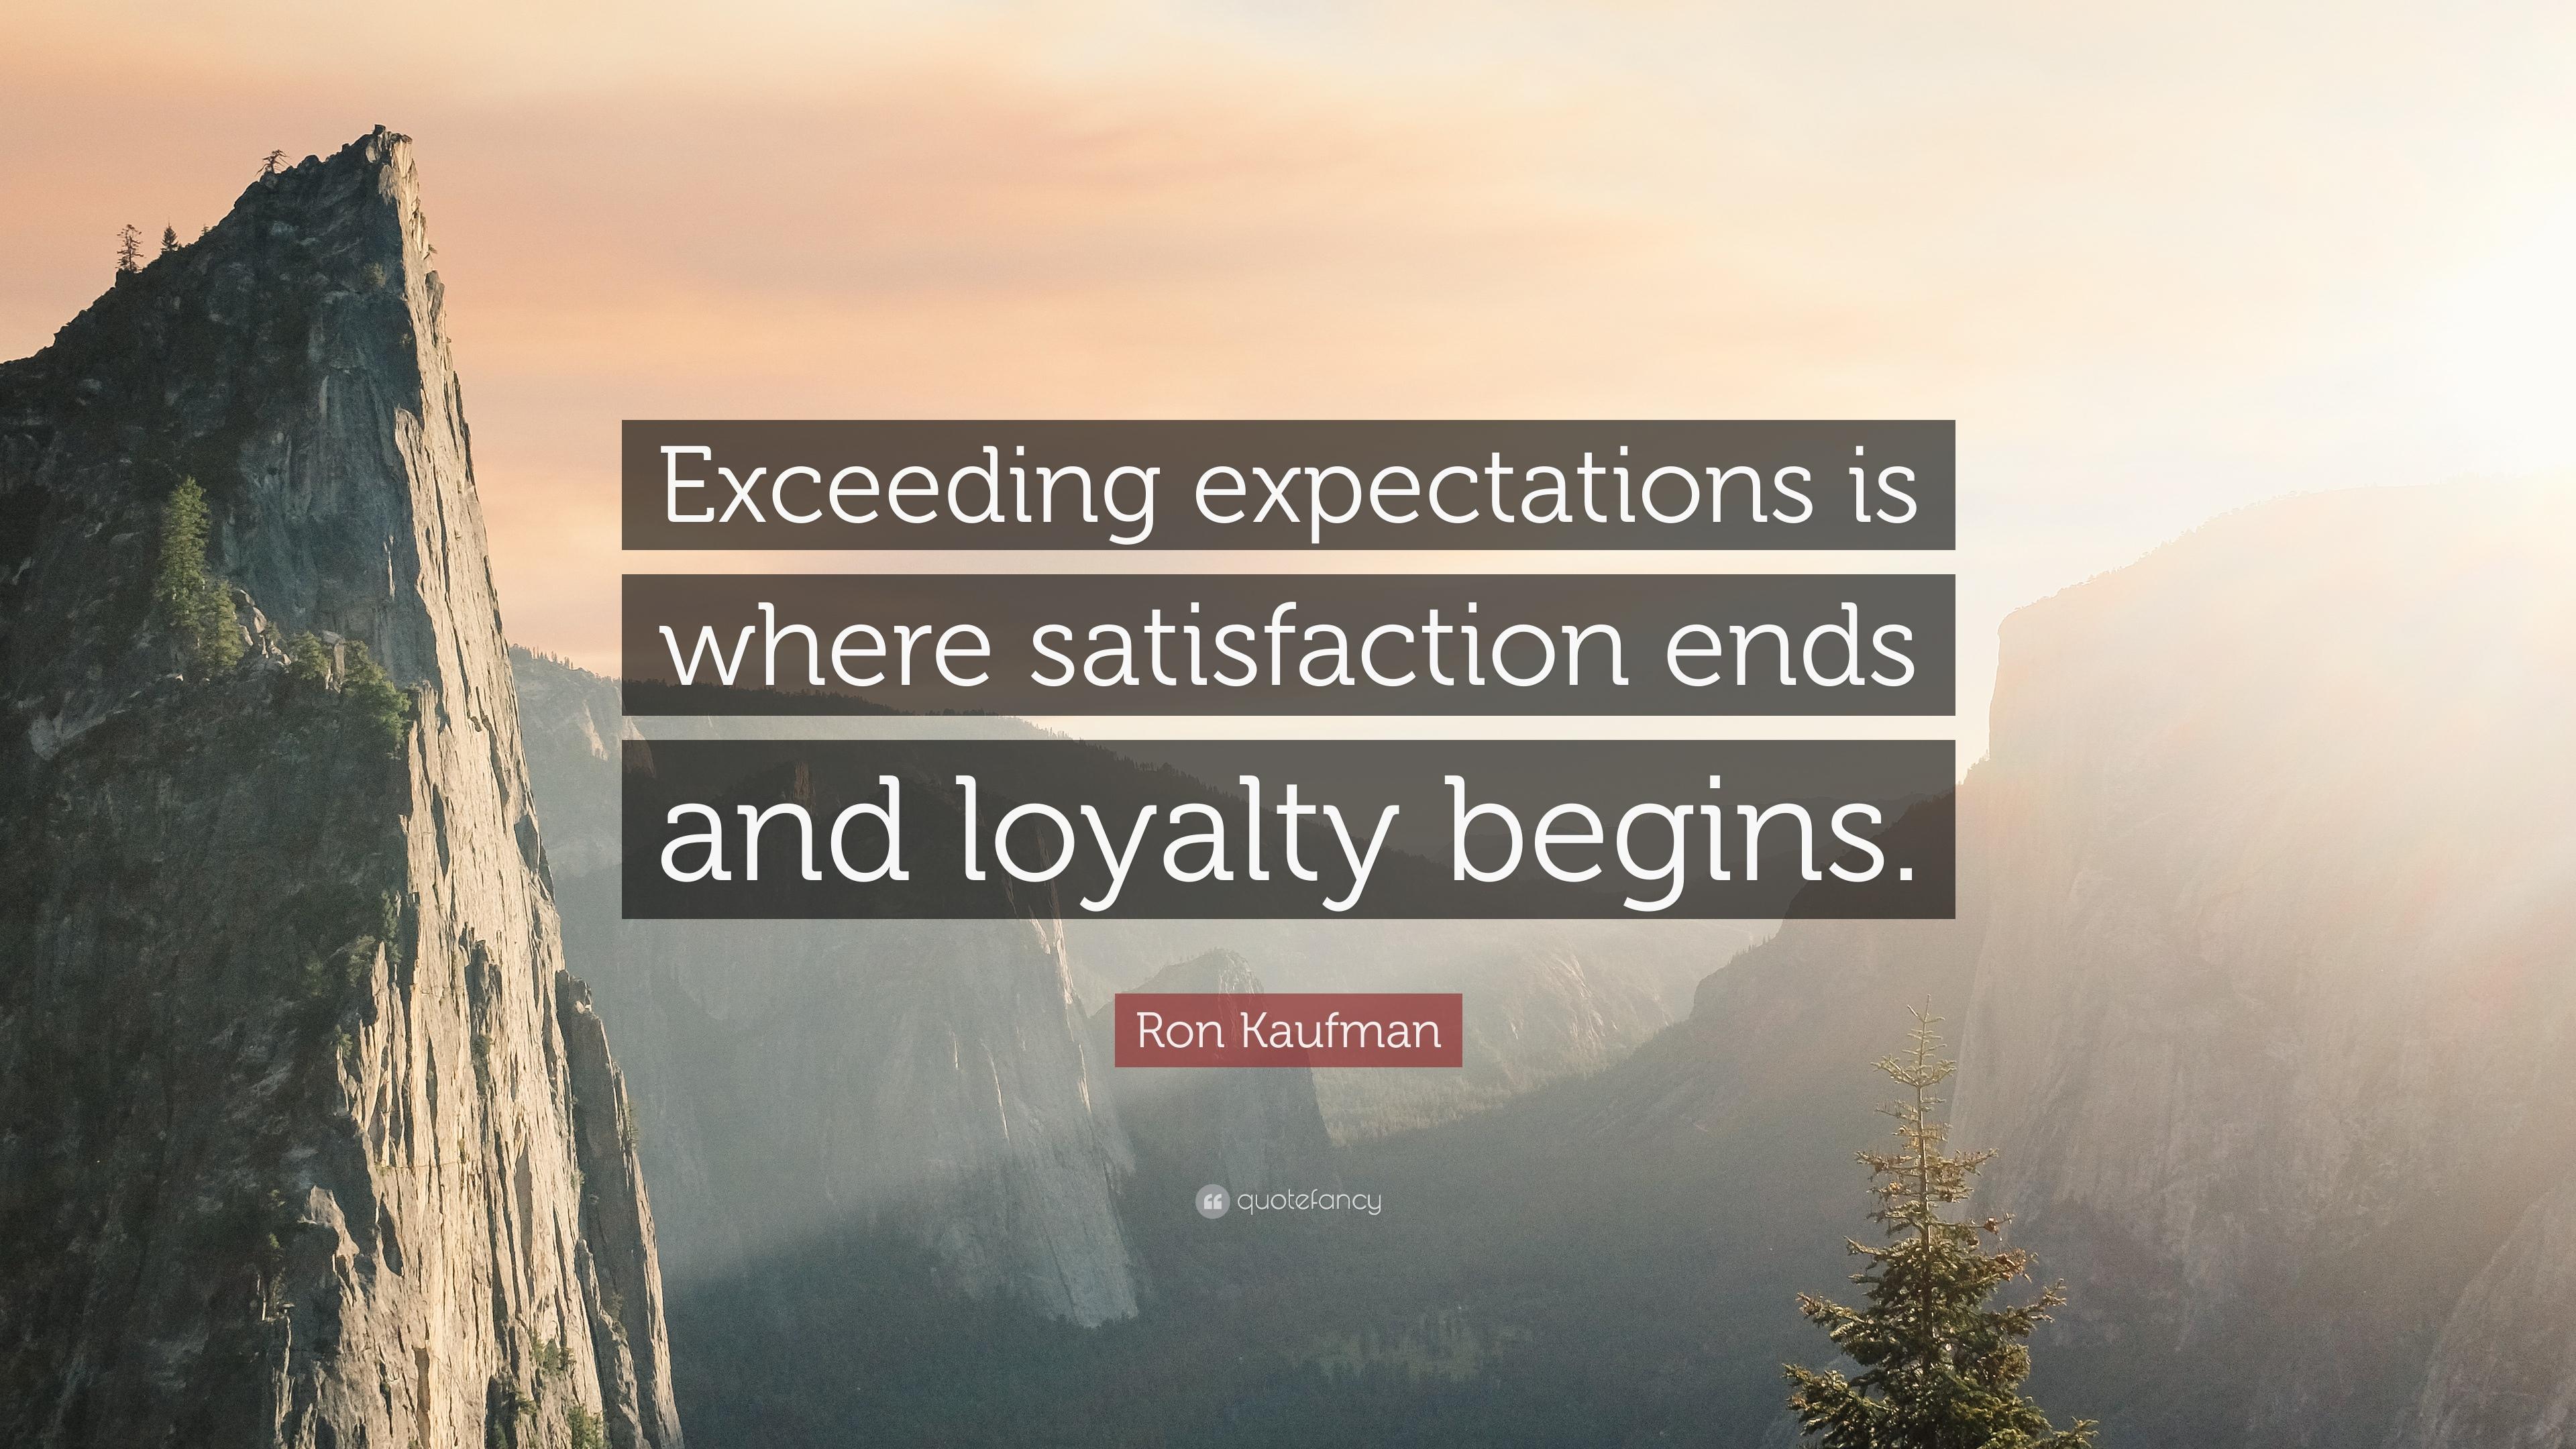 Ron Kaufman Quote: “Exceeding expectations is where